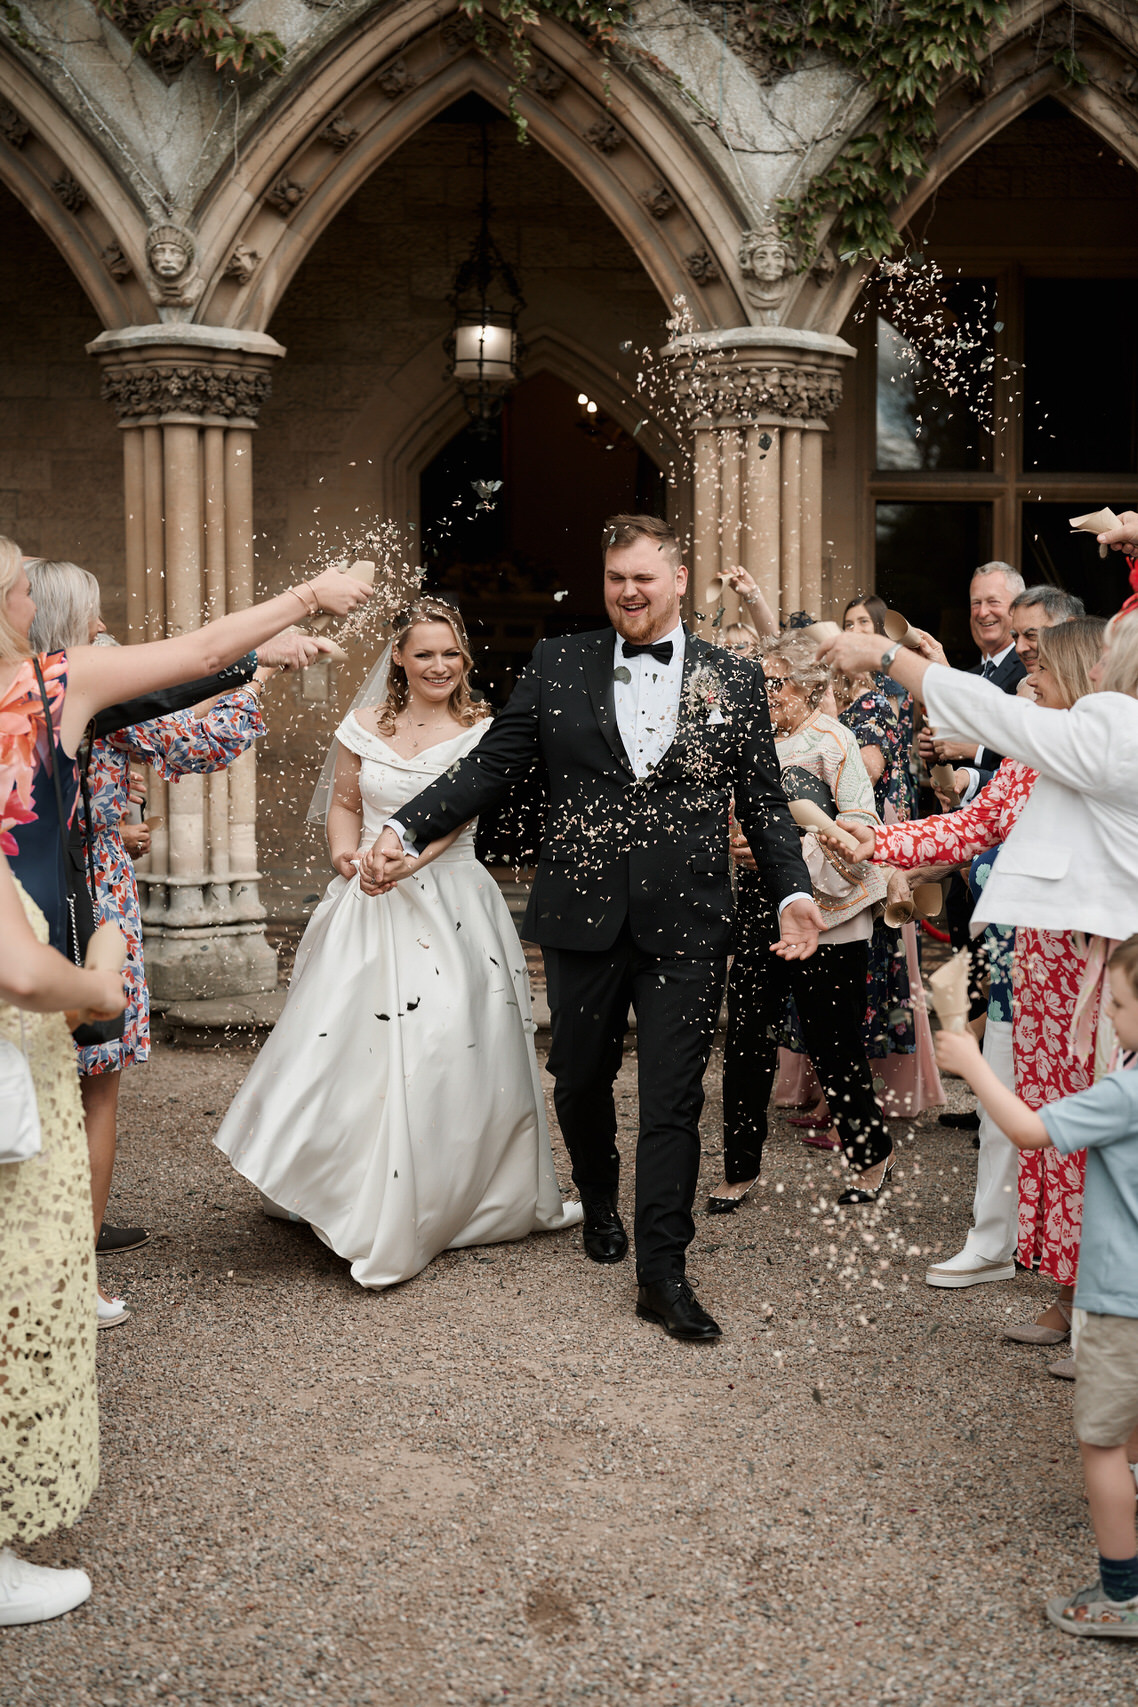 A couple getting married are tossing confetti at each other.